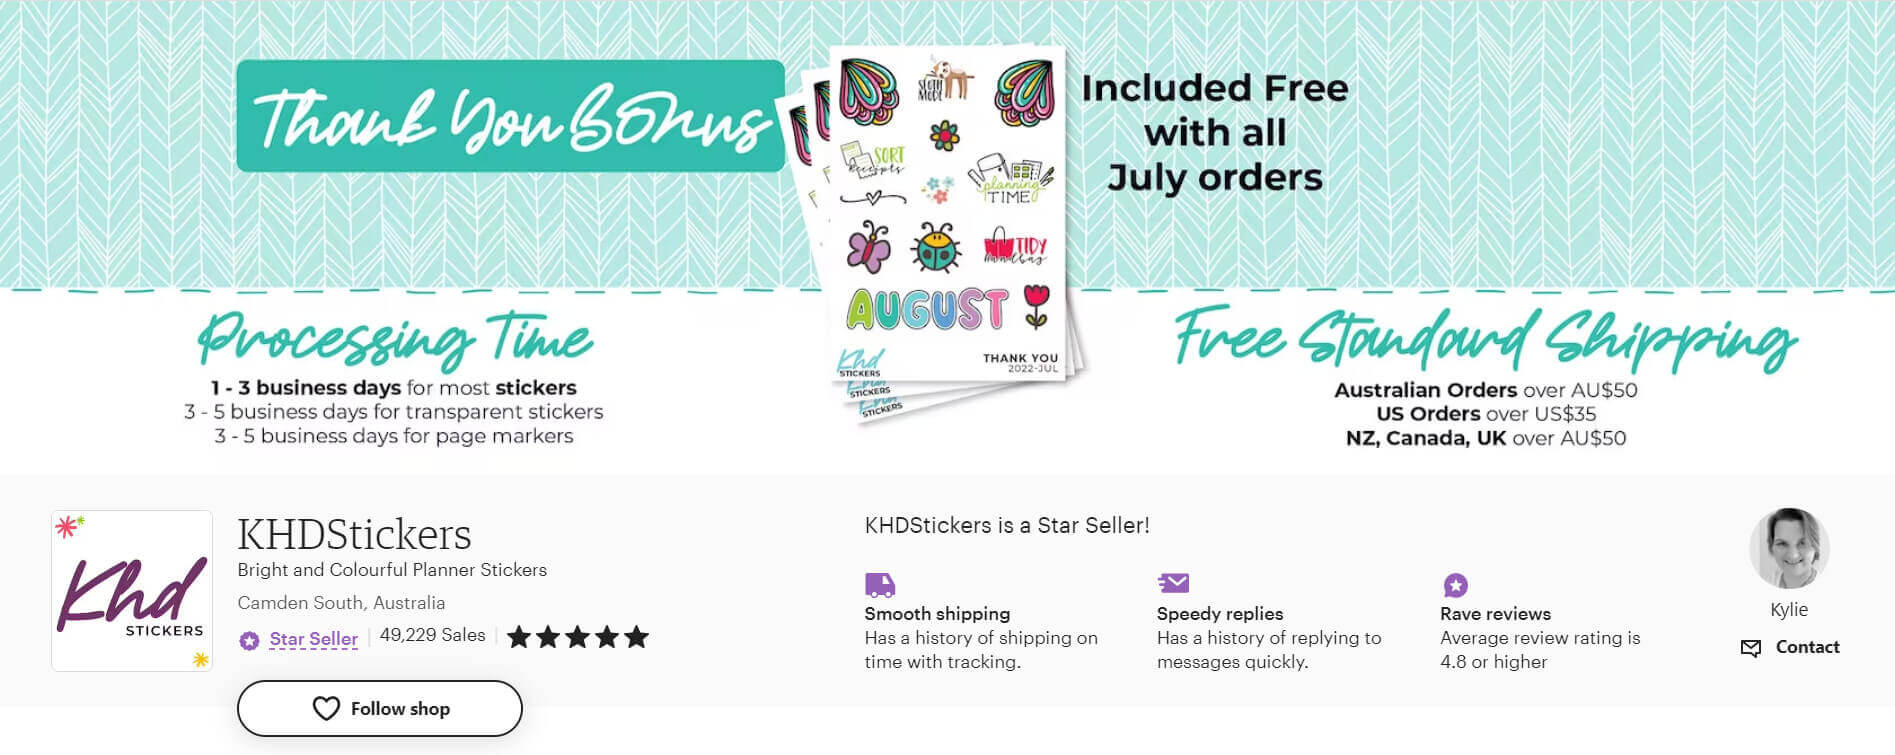 Adding free gifts to your Etsy banner can really attract your customers